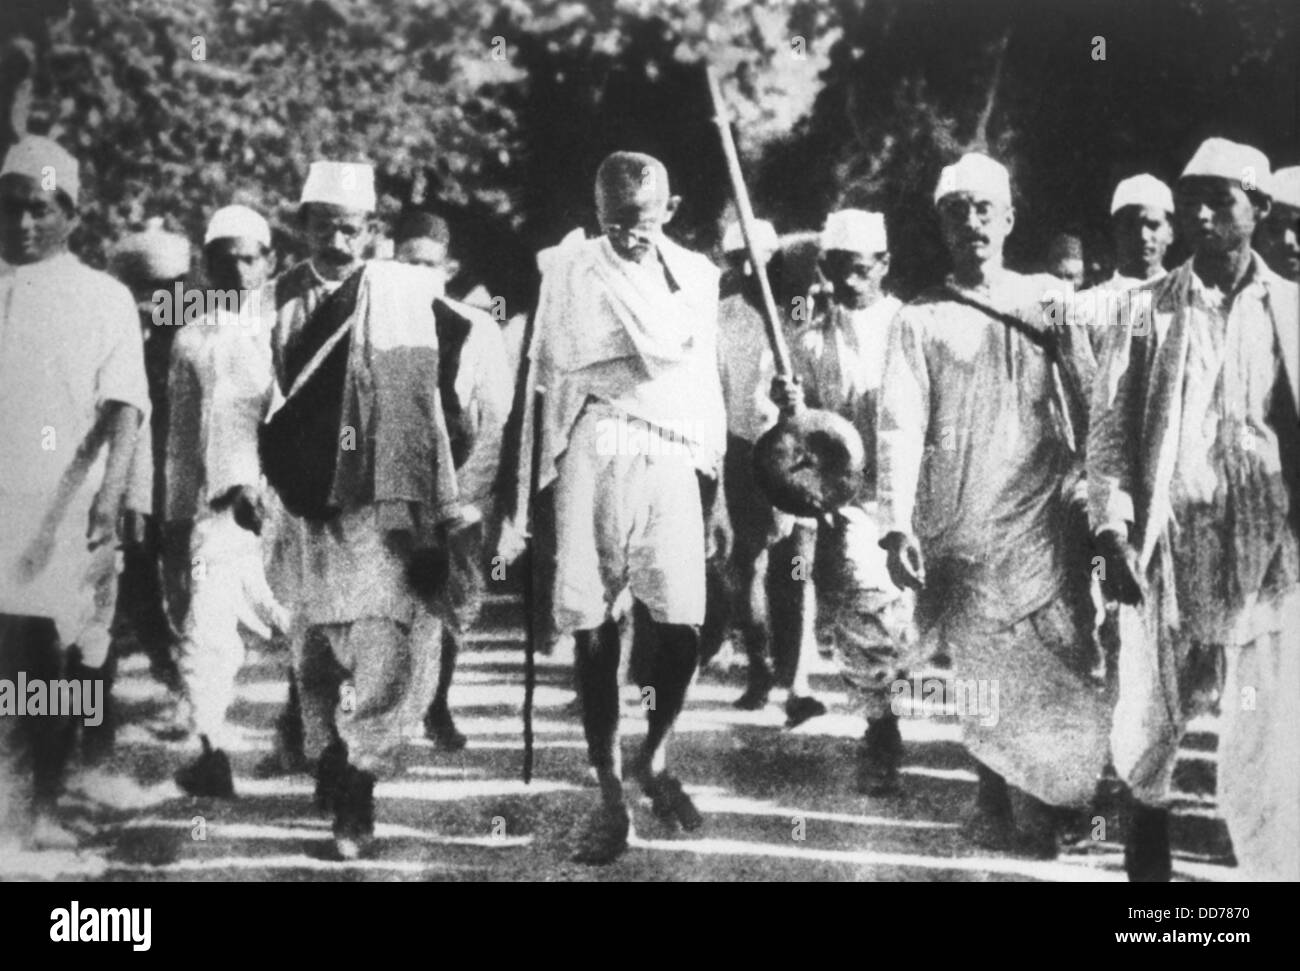 Mohandas Gandhi on the Salt March in 1930. He walked from 240 miles to the sea coast to produce salt without paying the British Stock Photo